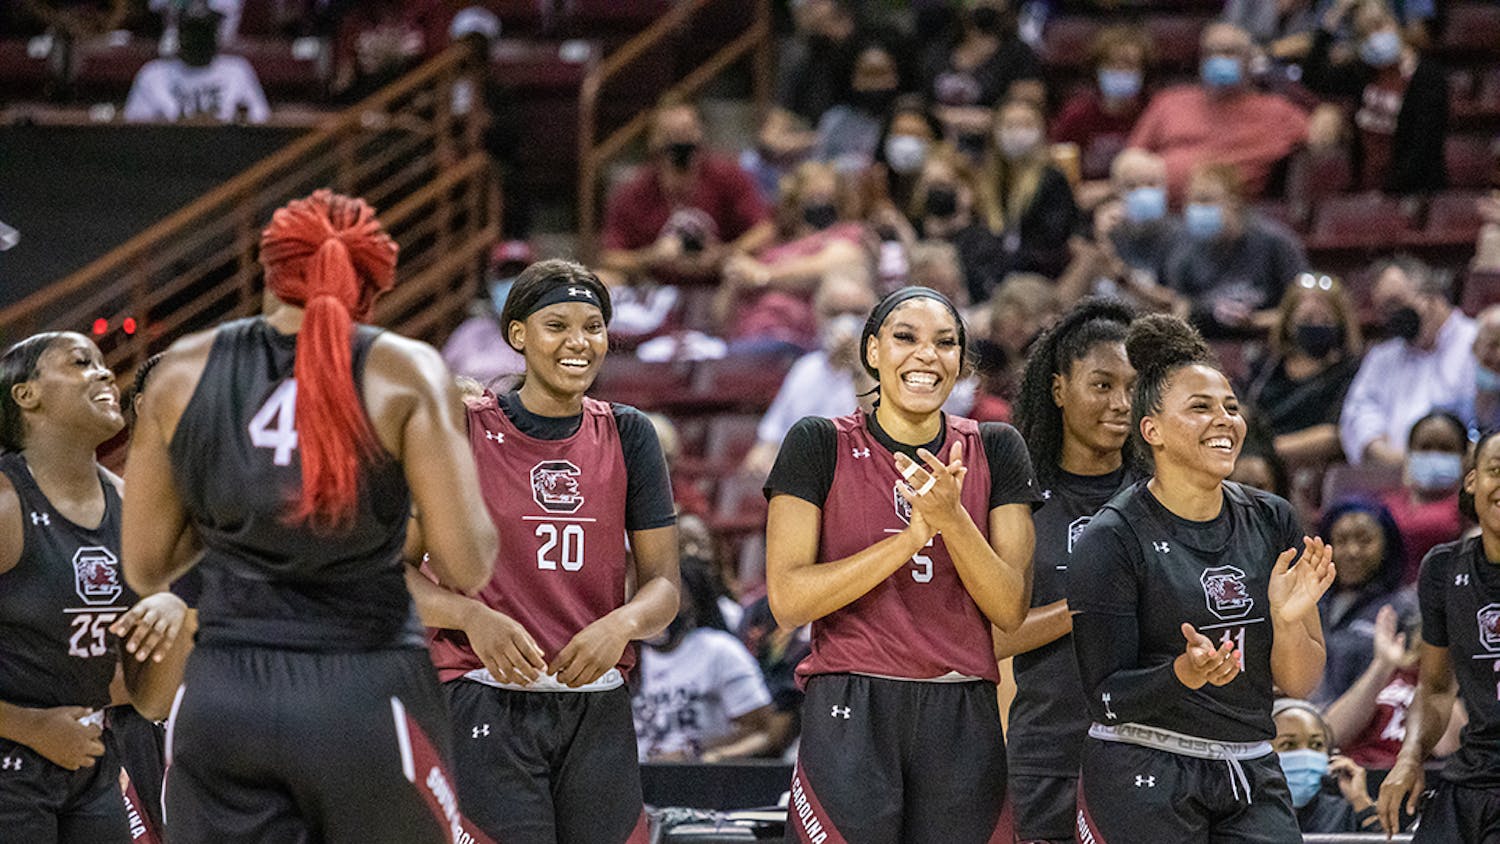 The Garnet and Black teams get ready to face off in the open scrimmage Oct. 1, 2021, before the start of the women's basketball season. The Black team won with a score of 22-18.